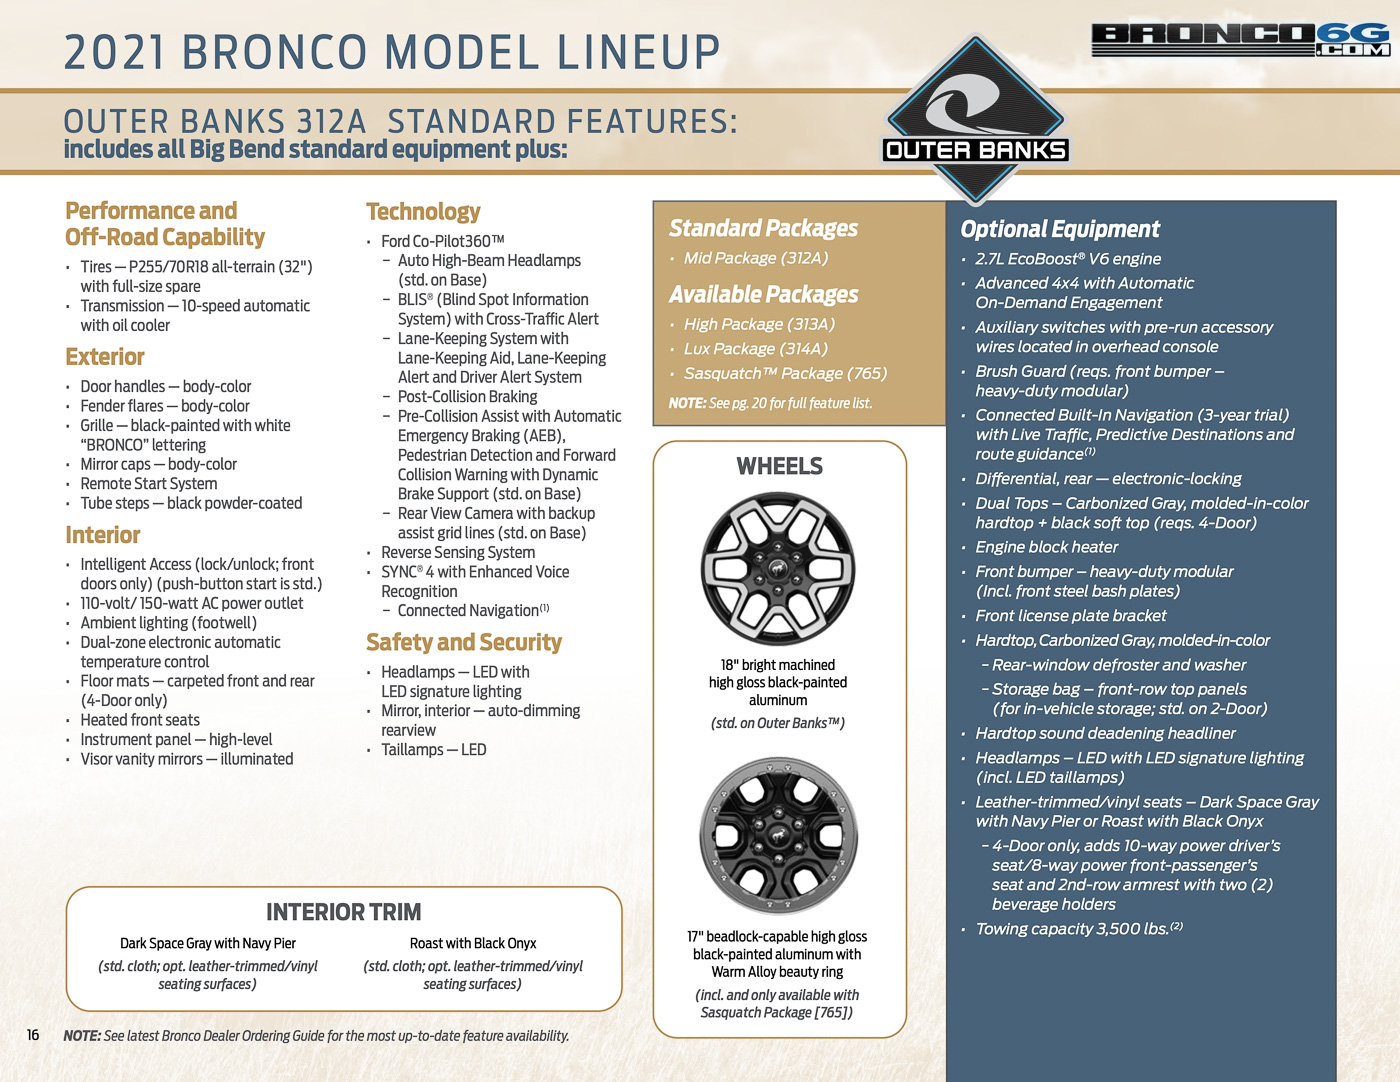 Ford Bronco 2021 Bronco Packaging Guide fa62dcf2fbe50fca20462a93386a8d68